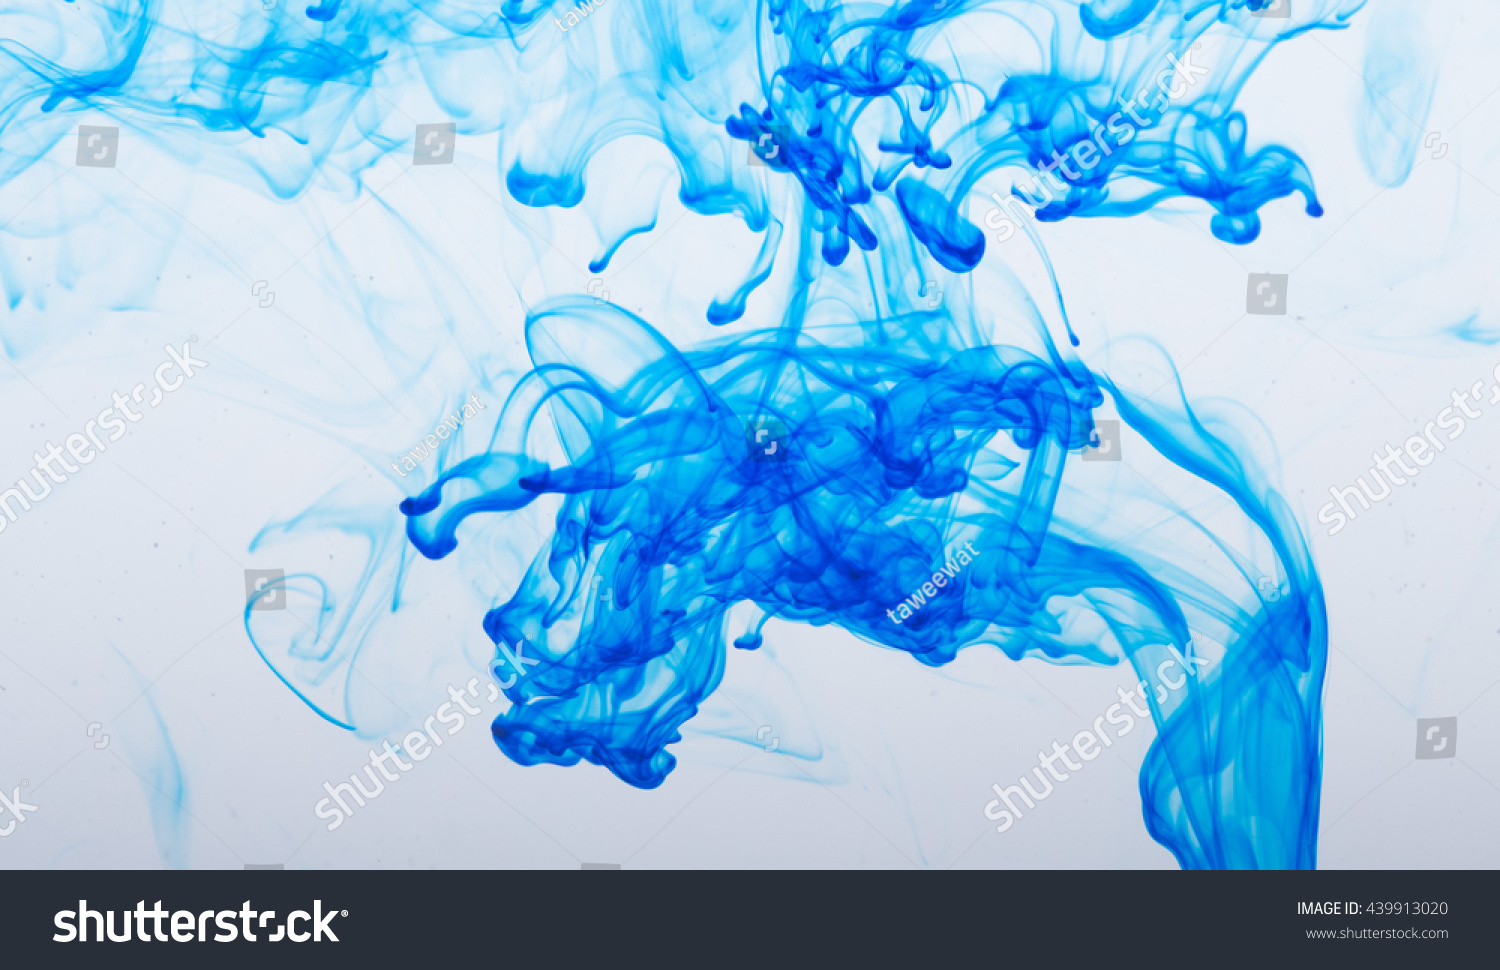 Color Ink Stock Photo 439913020 - Shutterstock